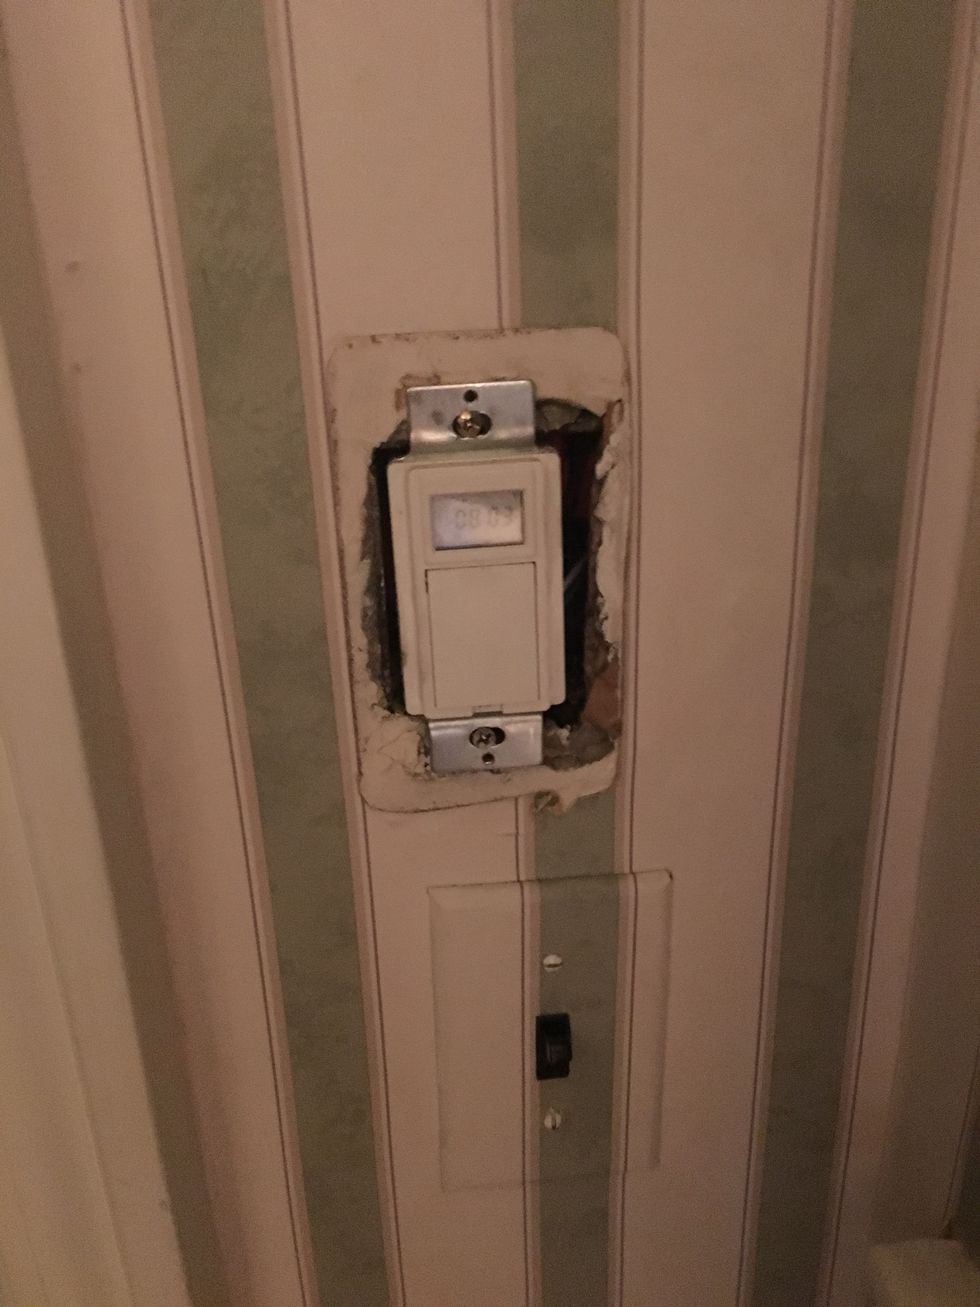 a photo of a smart light switch on the wall